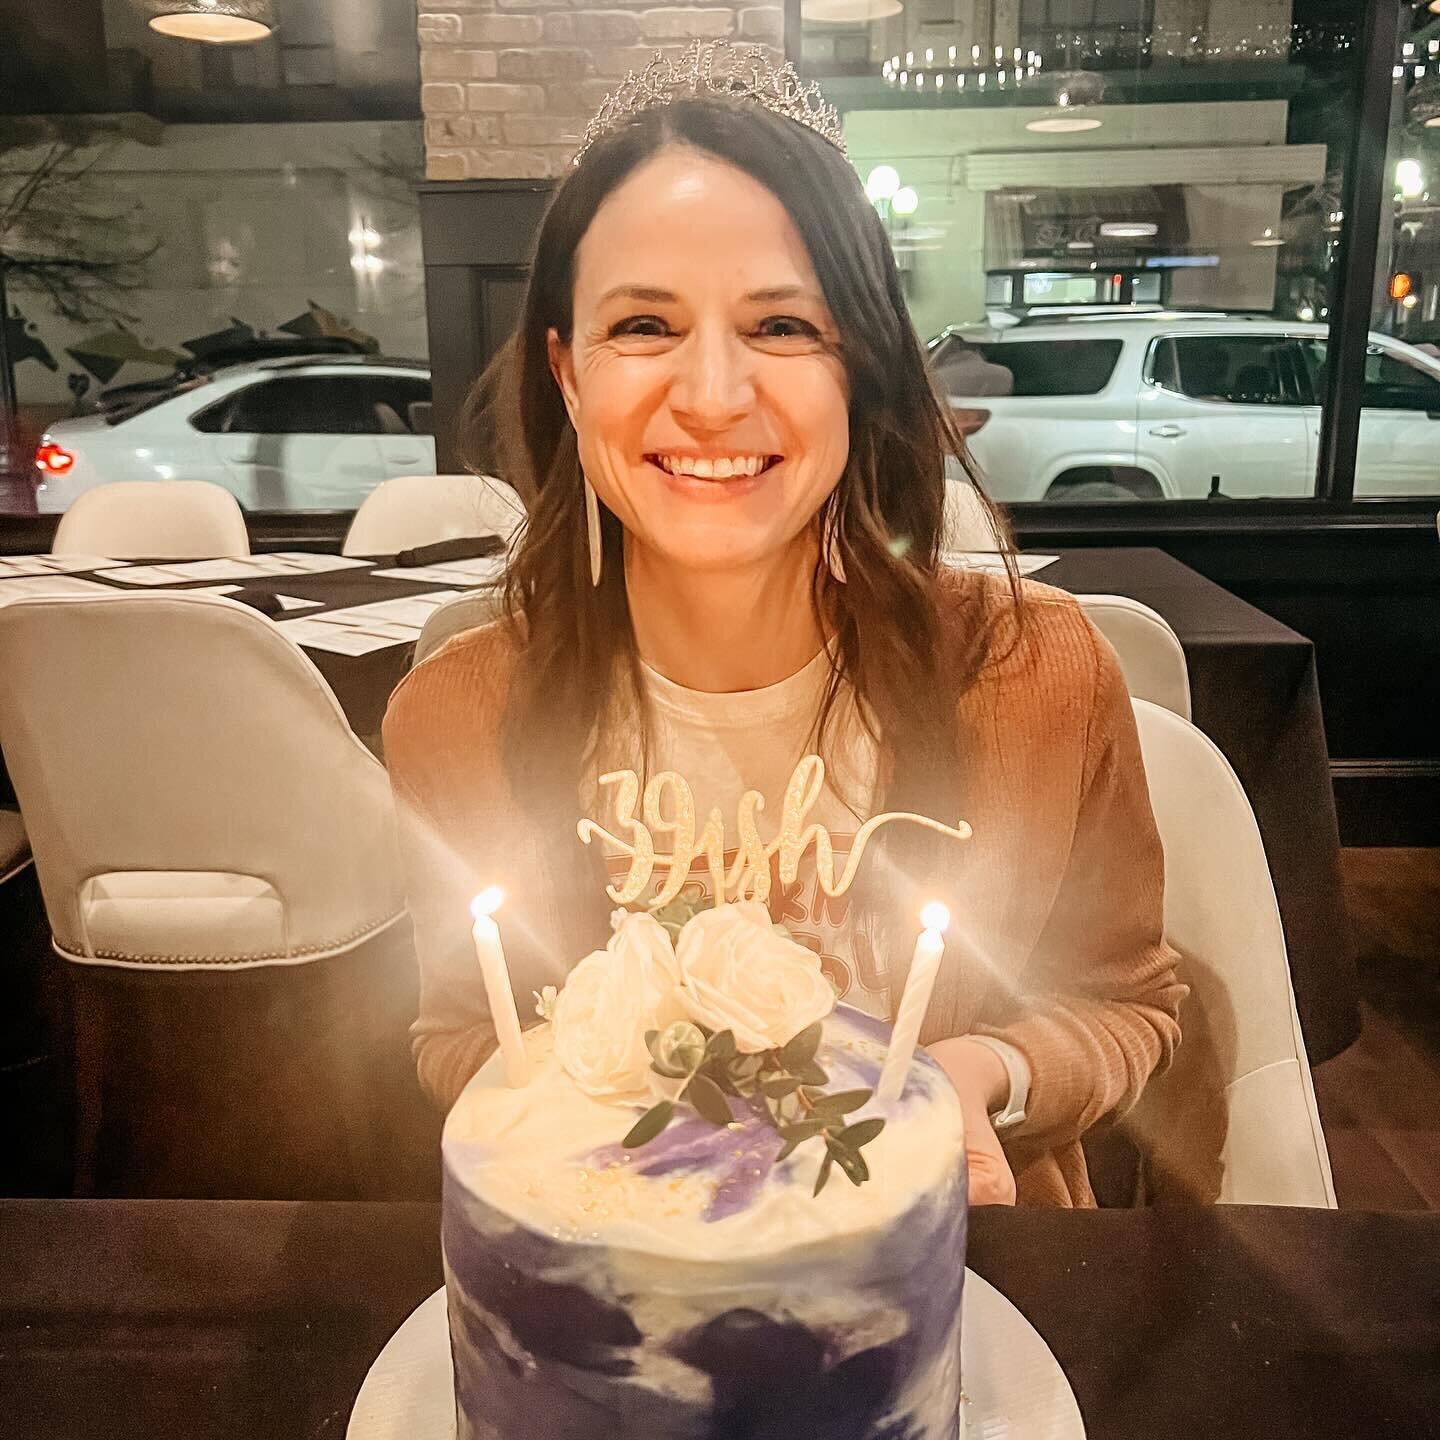 Last weekend, Rich set up a surprise dinner with two other couples and we celebrated my 39 ish birthday. I thought it would be a fun preview to the actual day! 🎈

Yesterday was my 40th birthday. I know age is just a number, but the turning of a deca